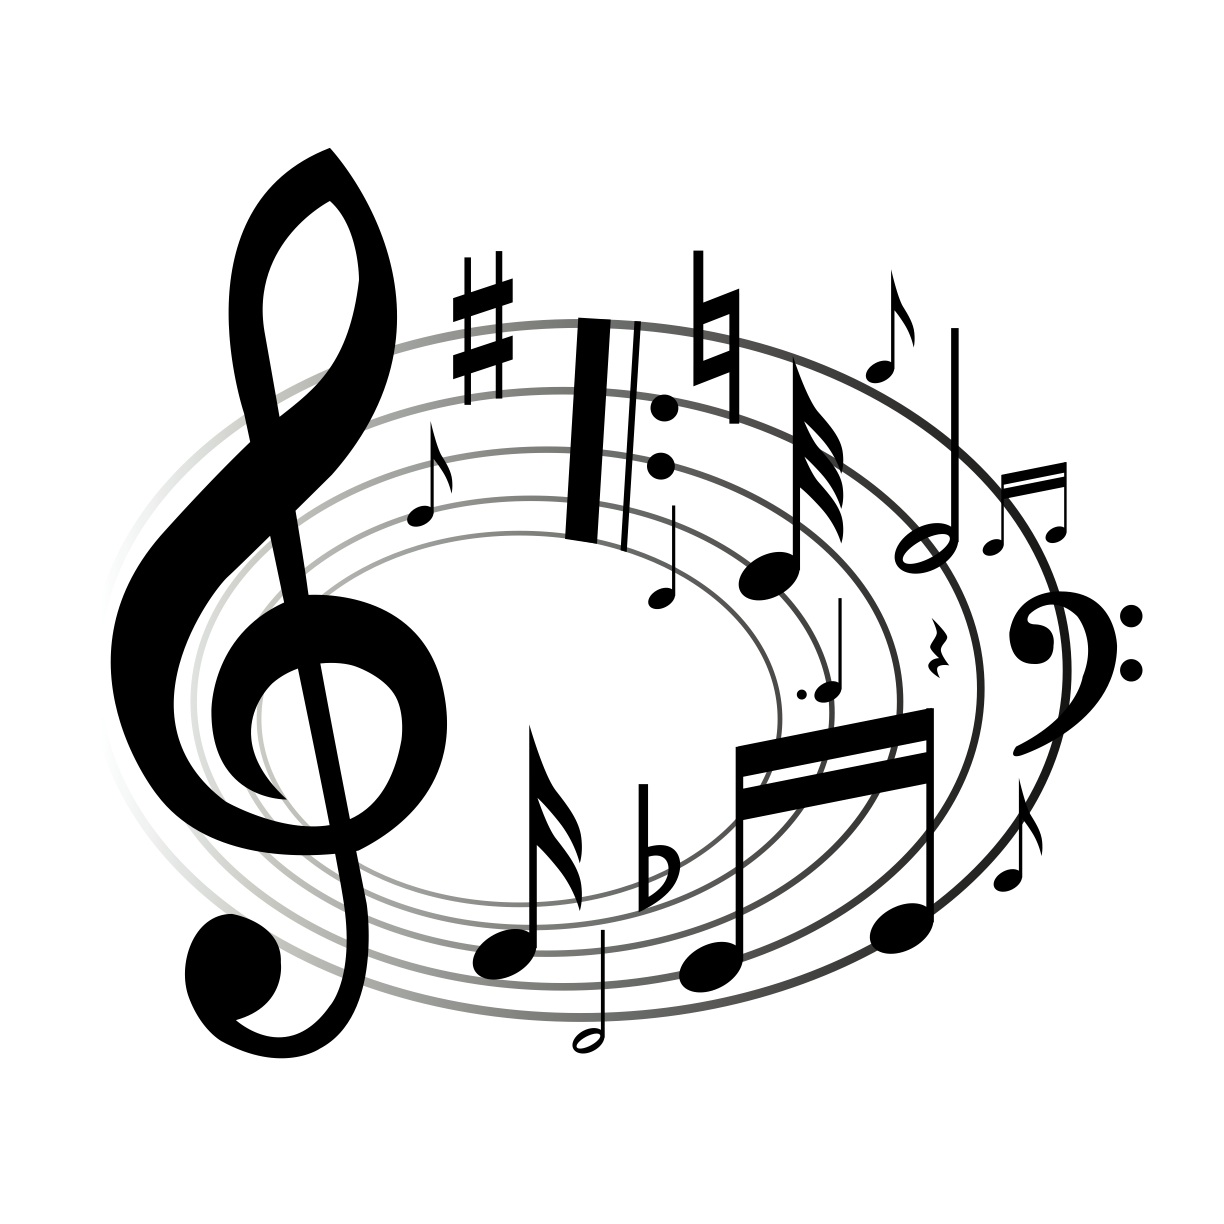 Small Music Notes Clip Art 4802 Hd Wallpapers Pictures In Music